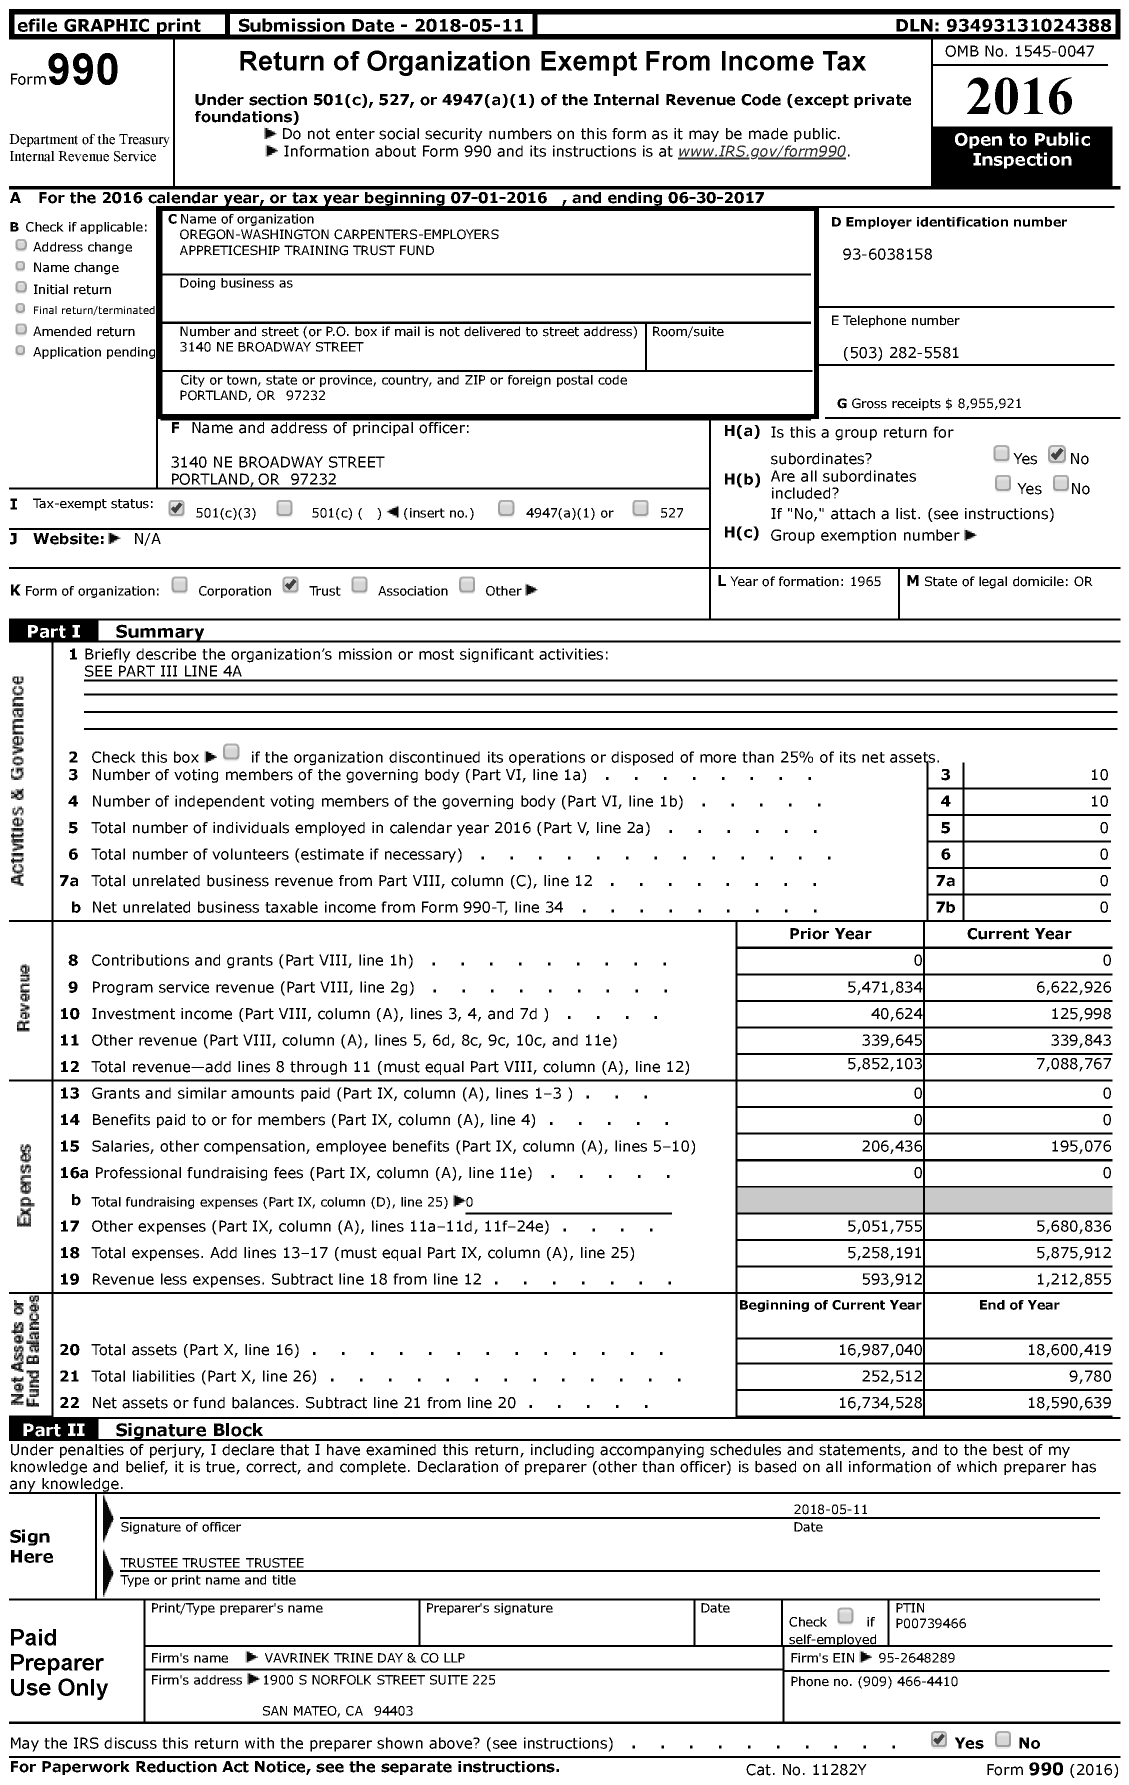 Image of first page of 2016 Form 990 for Oregon-Washington Carpenters-Employers Apprenticeship Training Trust Fund